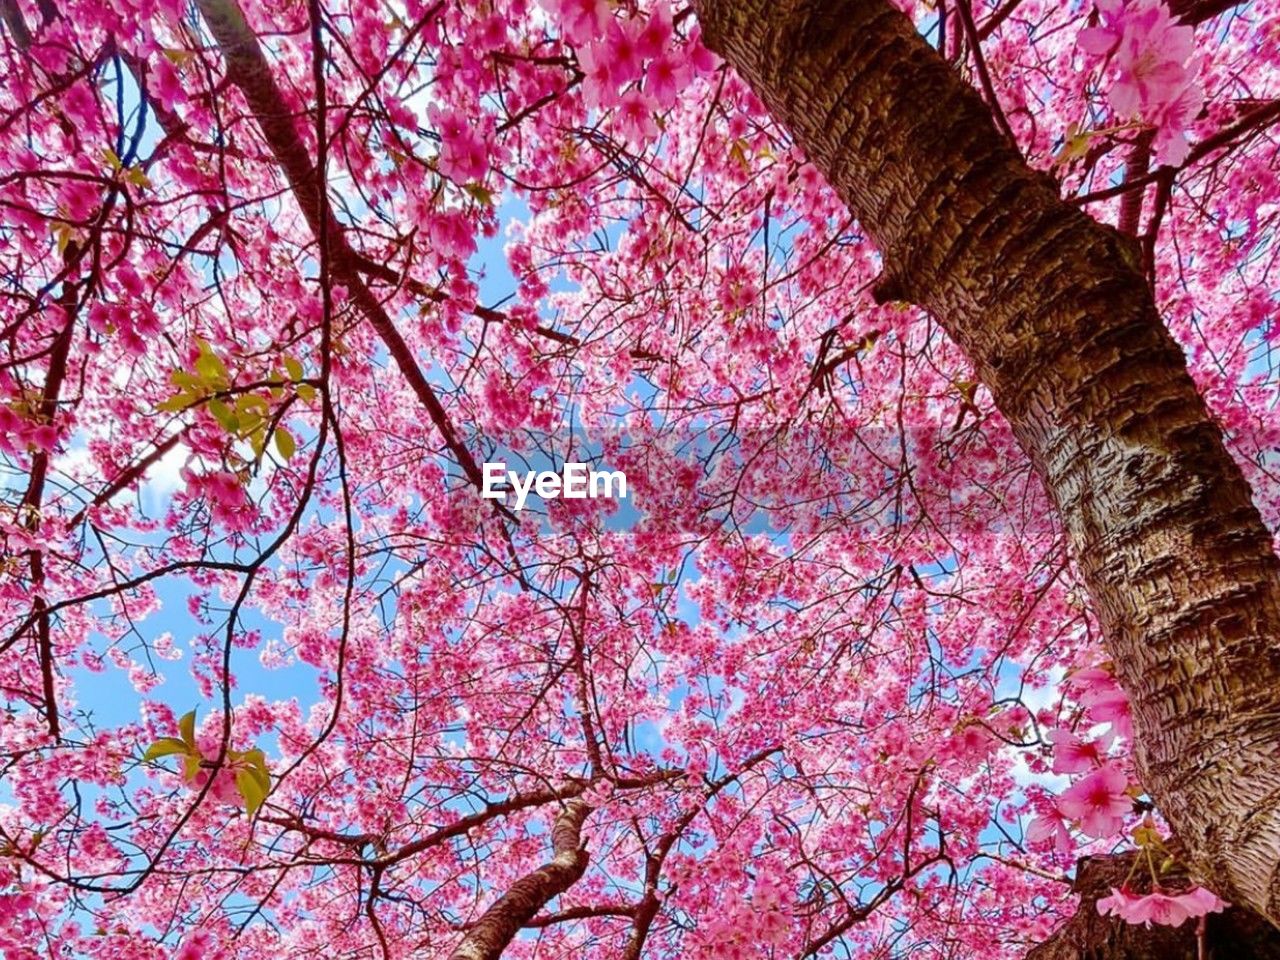 tree, plant, low angle view, branch, pink, growth, flower, beauty in nature, blossom, springtime, flowering plant, nature, fragility, freshness, no people, cherry blossom, cherry tree, day, spring, tree trunk, sky, trunk, outdoors